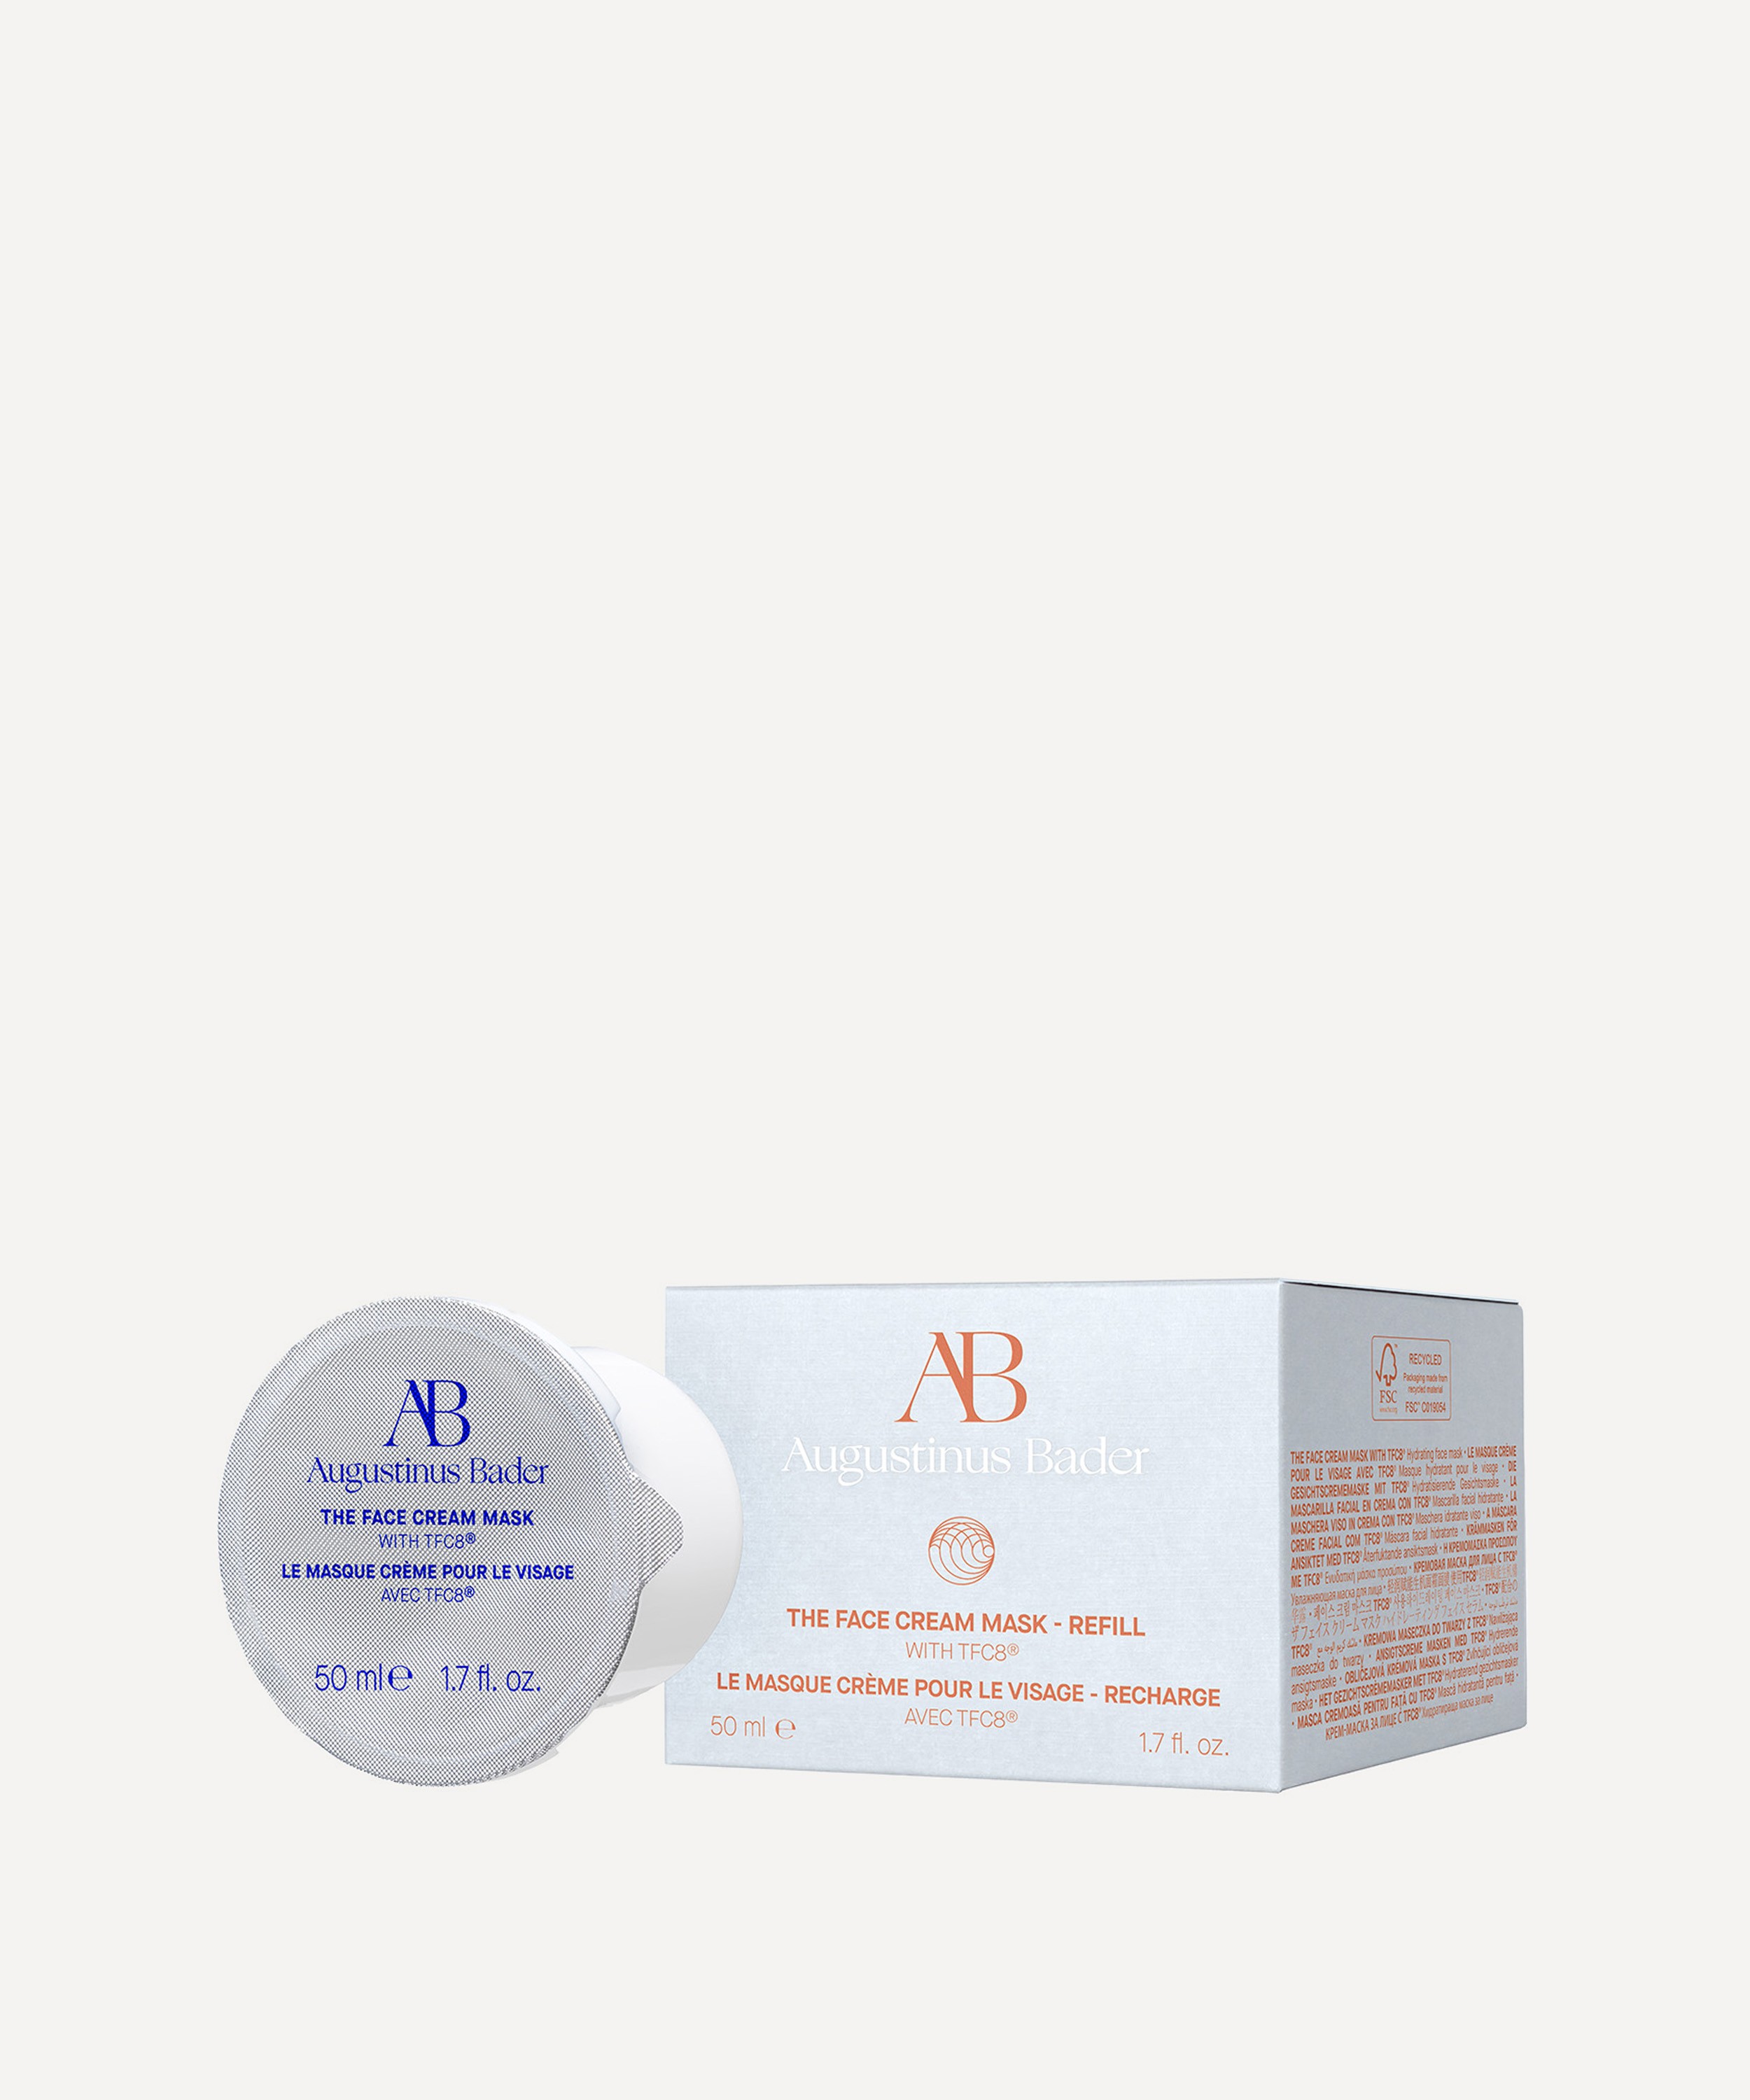 Augustinus Bader - The Face Cream Mask Refill 50ml